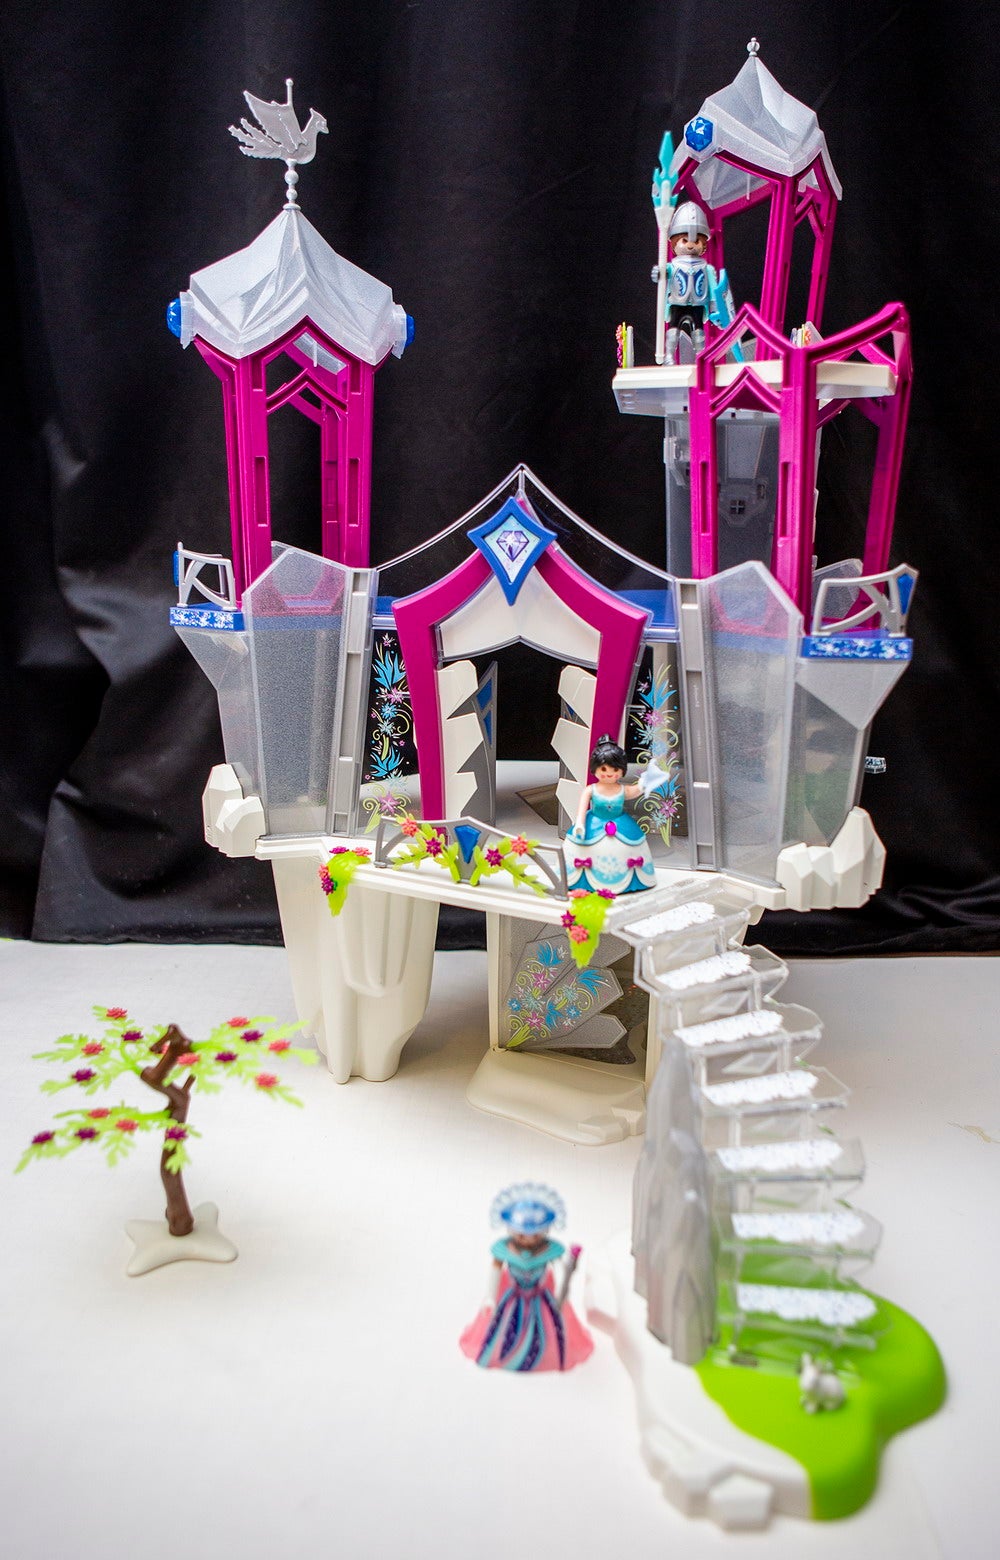 REVIEW: Playmobil Crystal Palace and Crystal Diamond Hideout | Figures.com